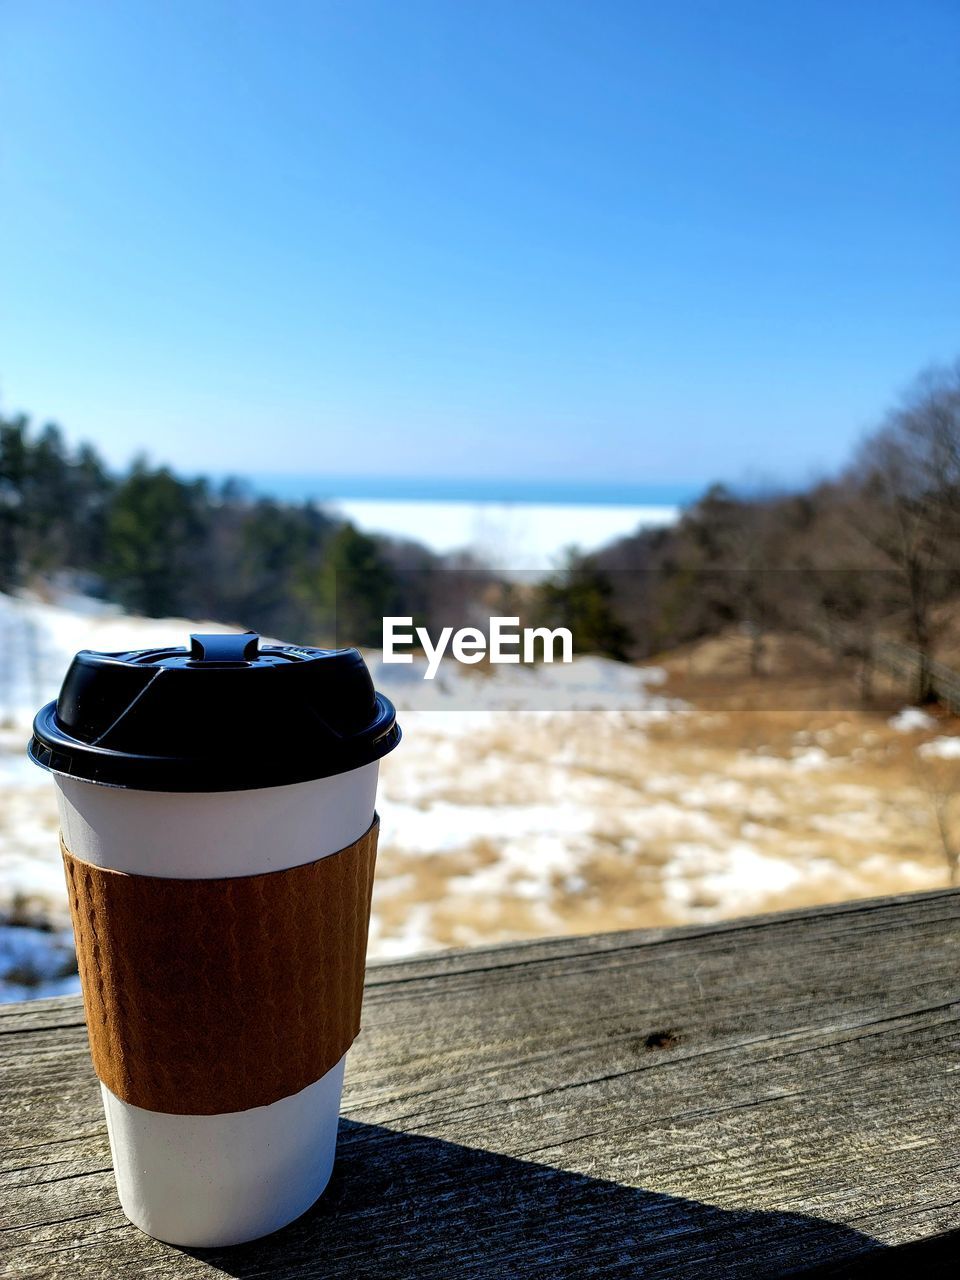 CLOSE-UP OF COFFEE CUP ON TABLE AGAINST CLEAR SKY